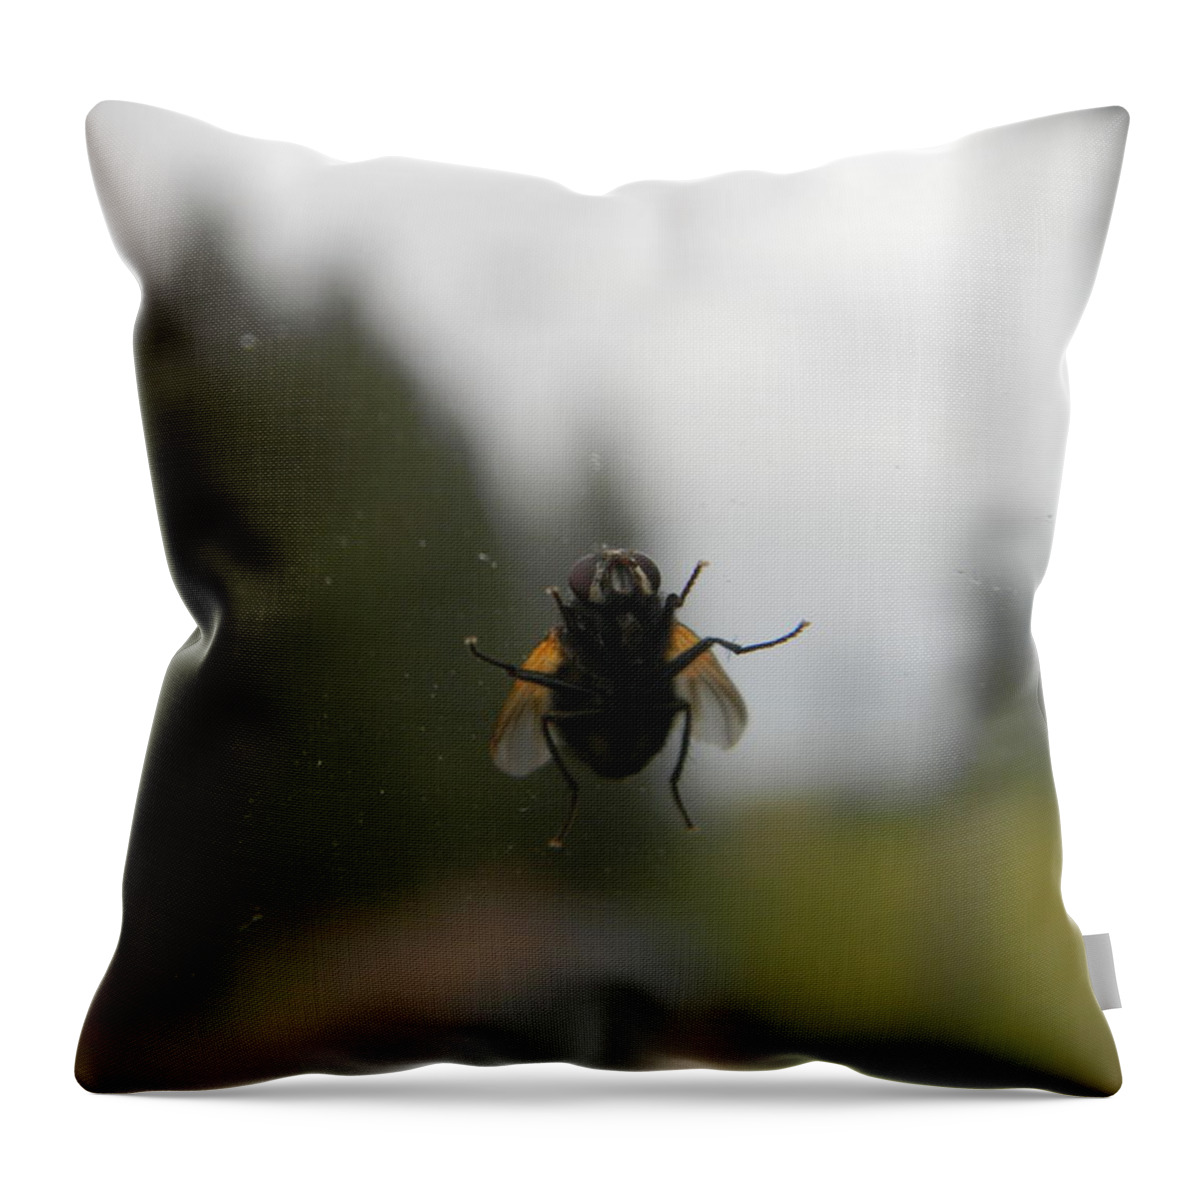 Insect Throw Pillow featuring the photograph The Fly by Randi Seaman